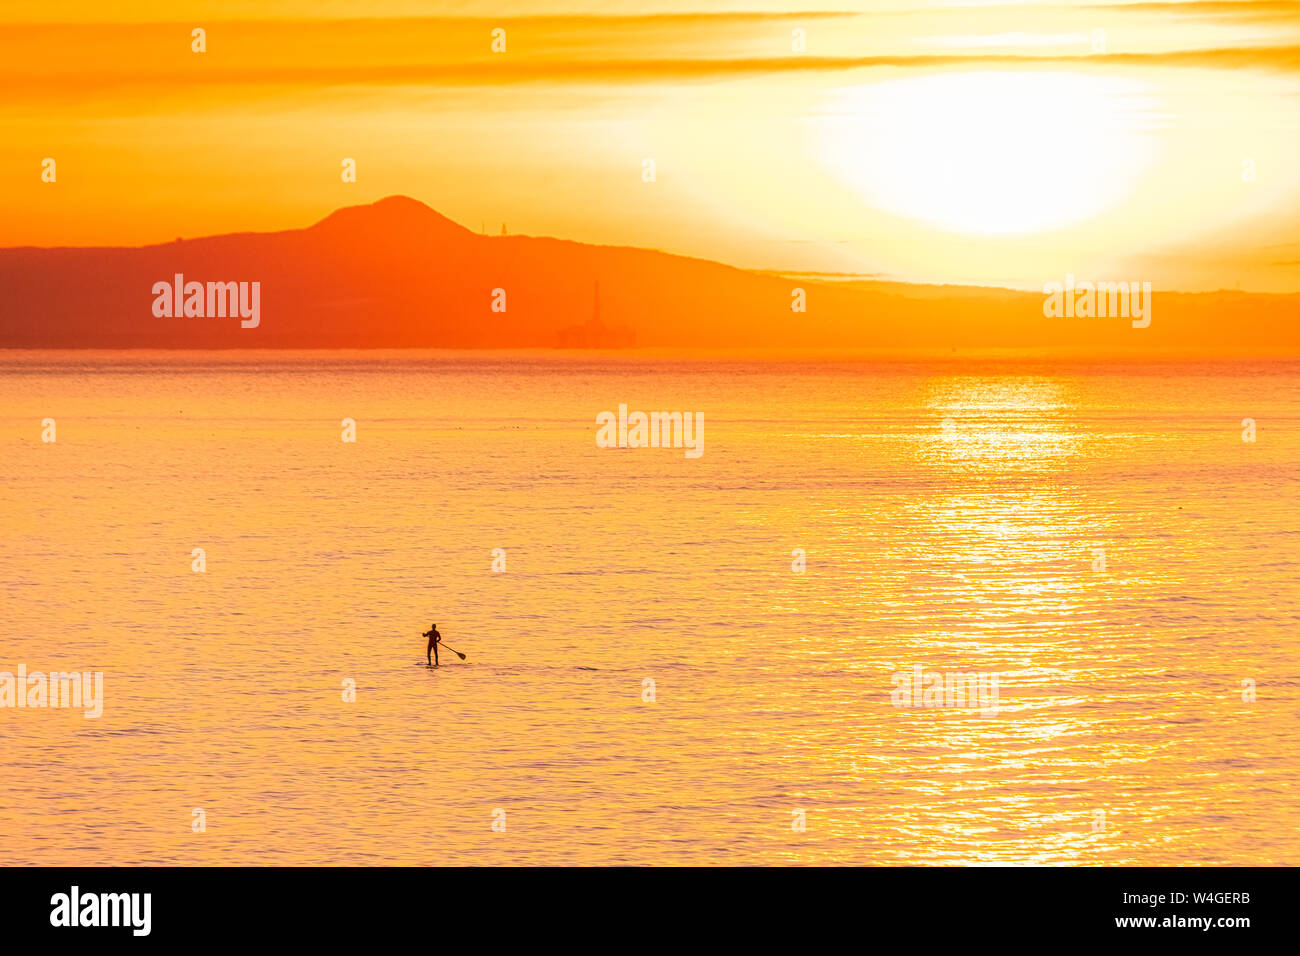 Man on stand up paddle board at sunset, North Berwick, East Lothian, Scotland Stock Photo